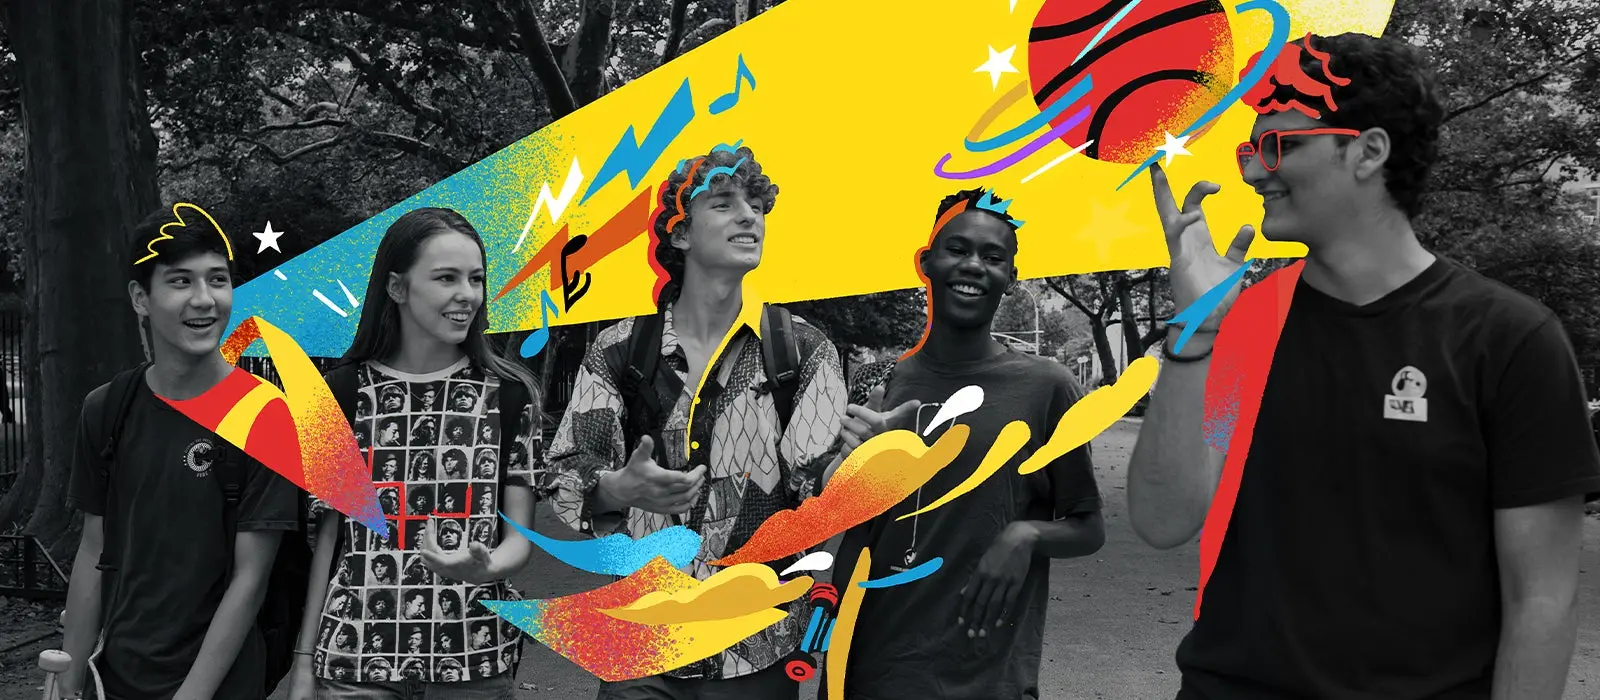 Black and white image of high school students smiling and walking outside. Colorful graphics stand out in contrast. 